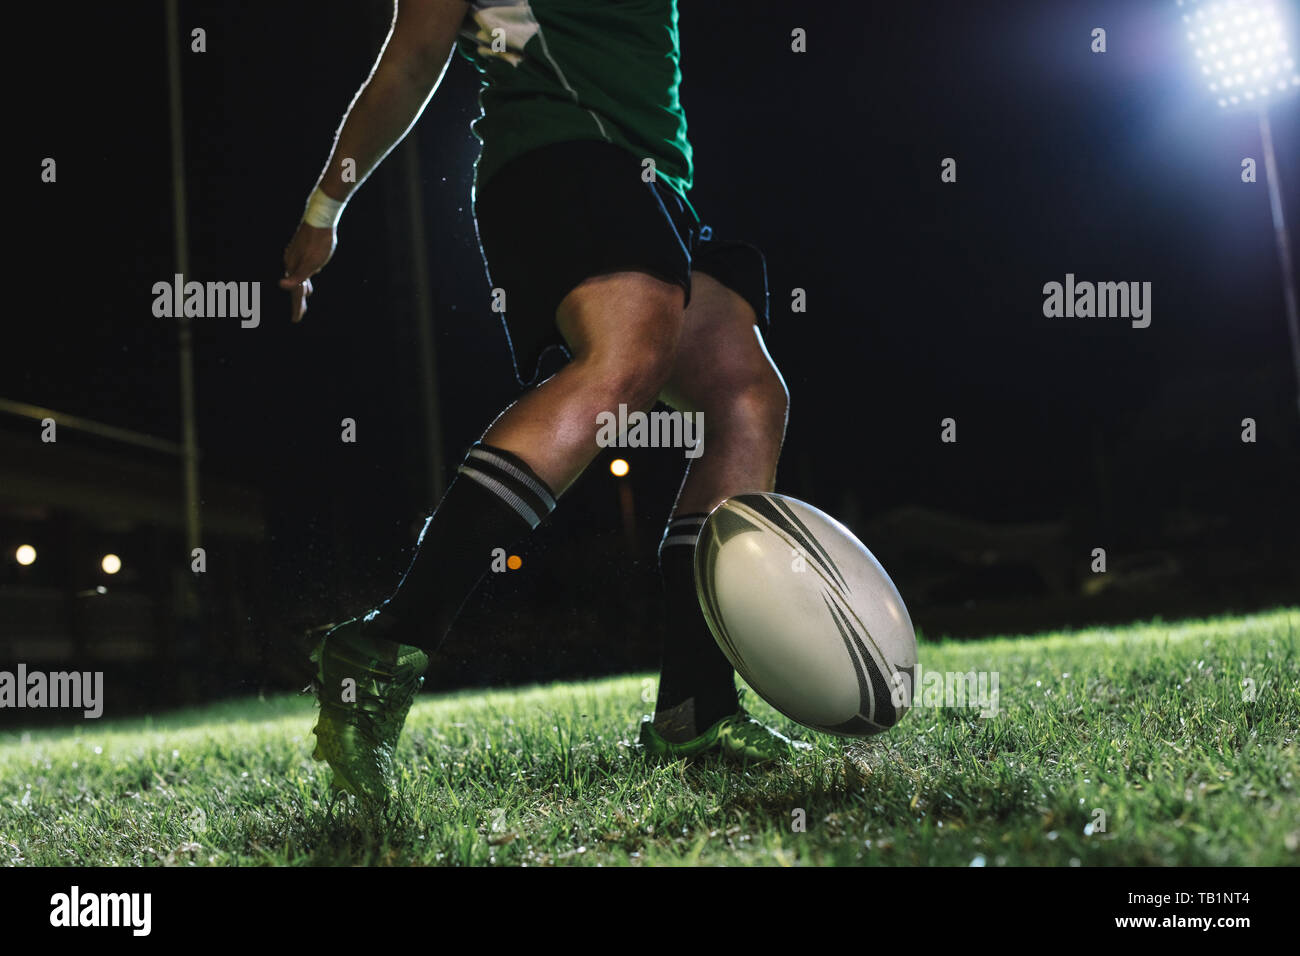 Rugby player drops the ball on the ground and then kicks it just as it bounces. Rugby player hitting a dropped goal under lights at sports arena. Stock Photo